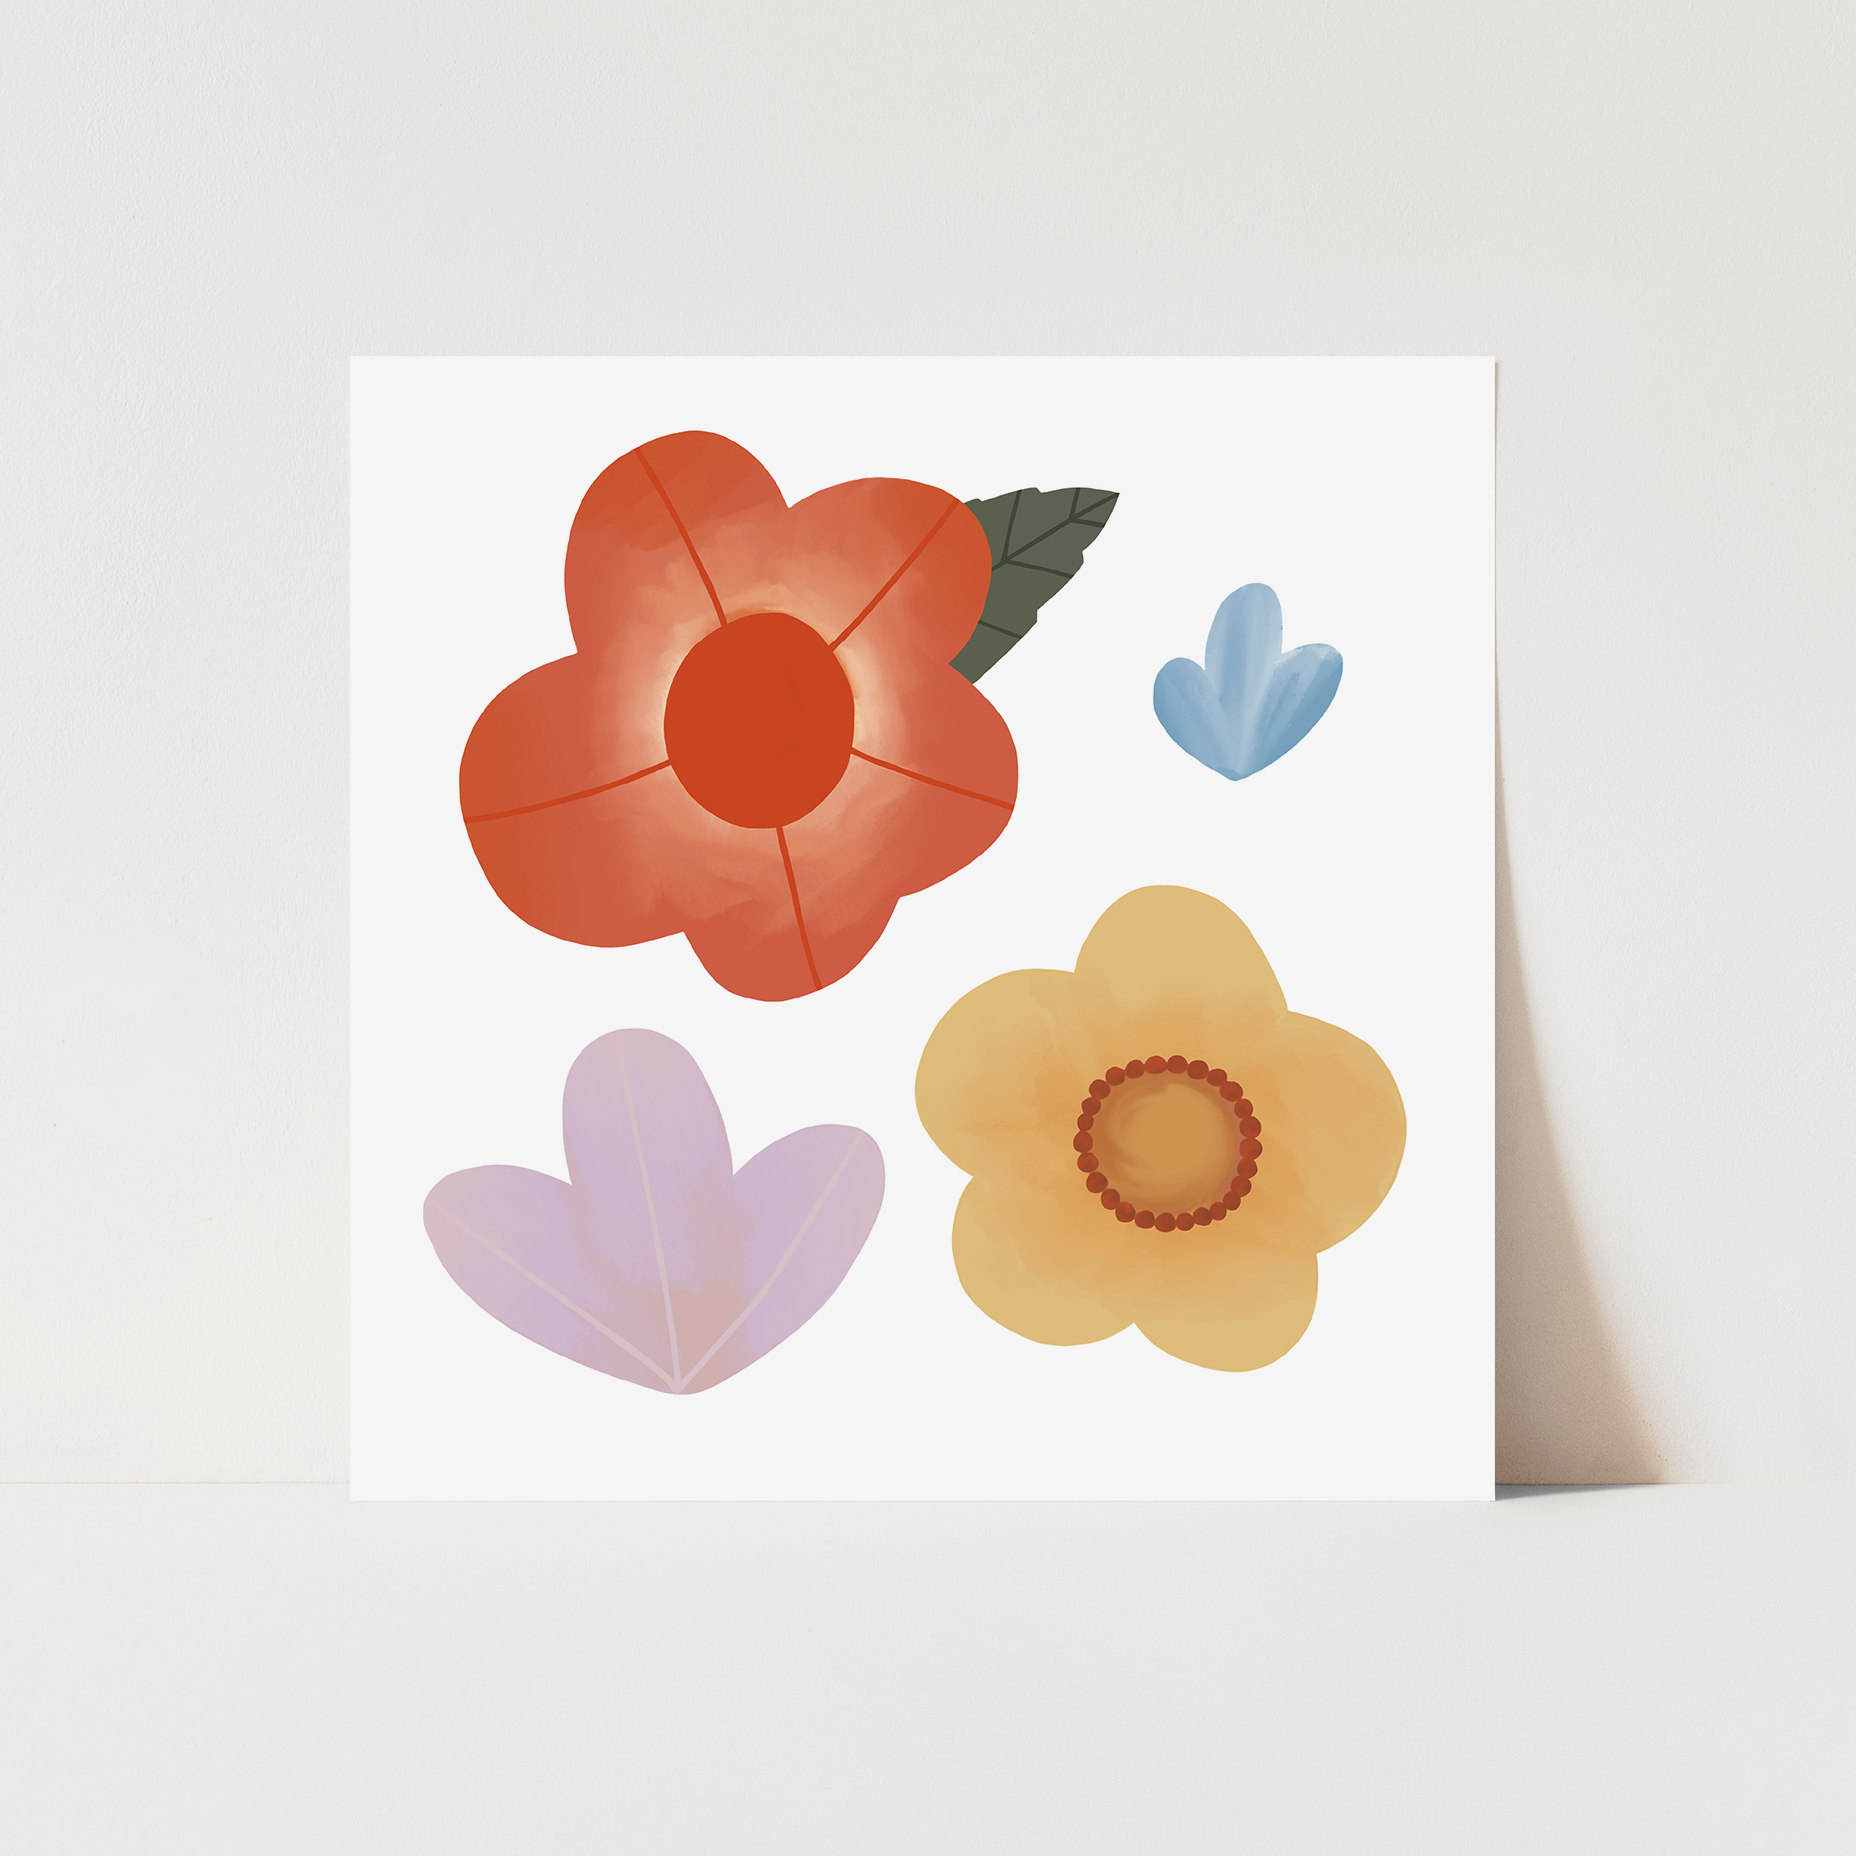 Growing Love Flower Art Print by Kid of the Village (2 Sizes Available)